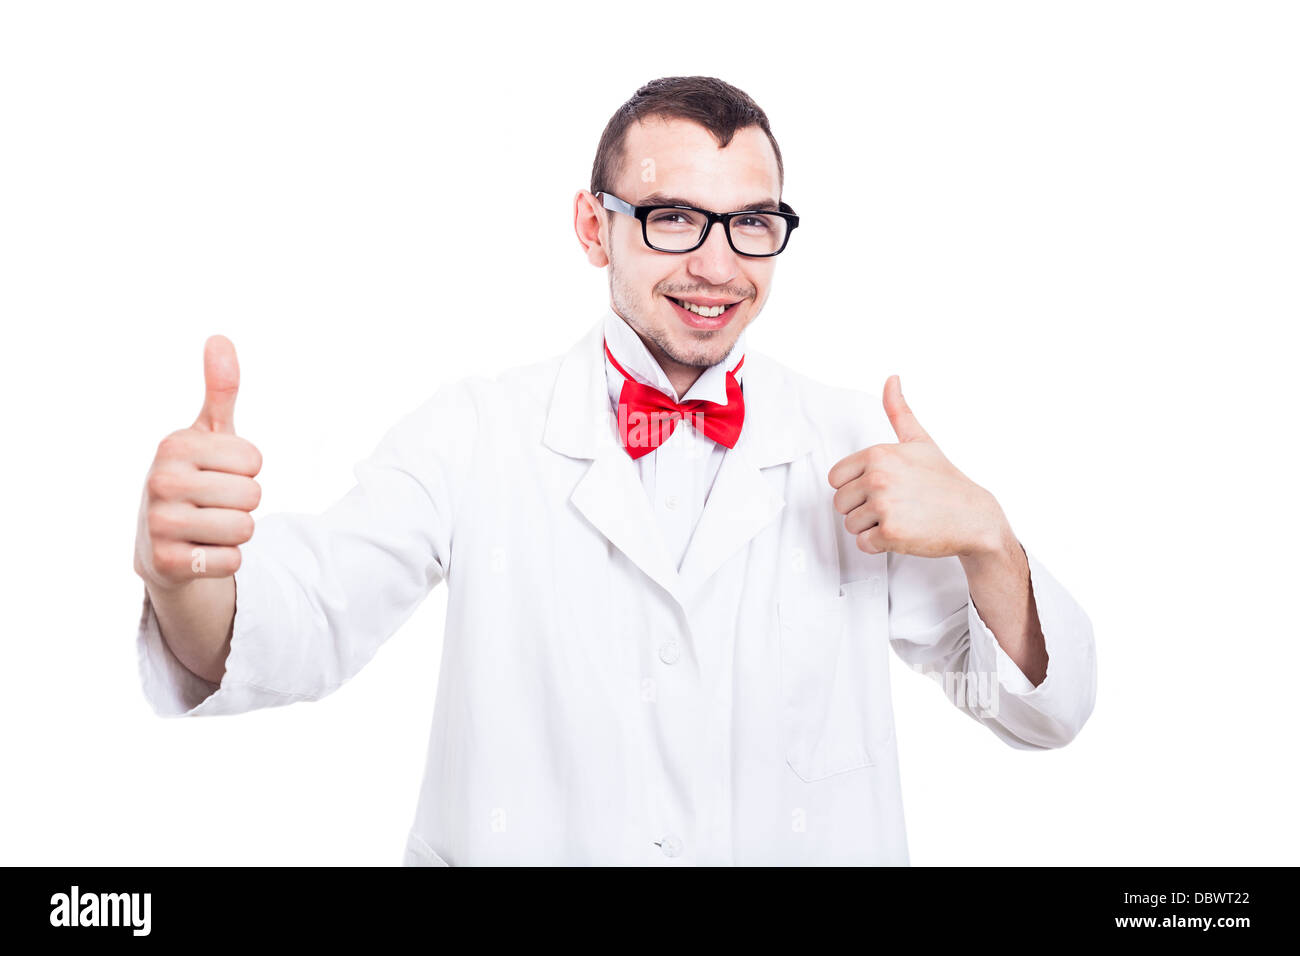 Young happy scientist in lab coat showing thumbs up, isolated on white background Stock Photo